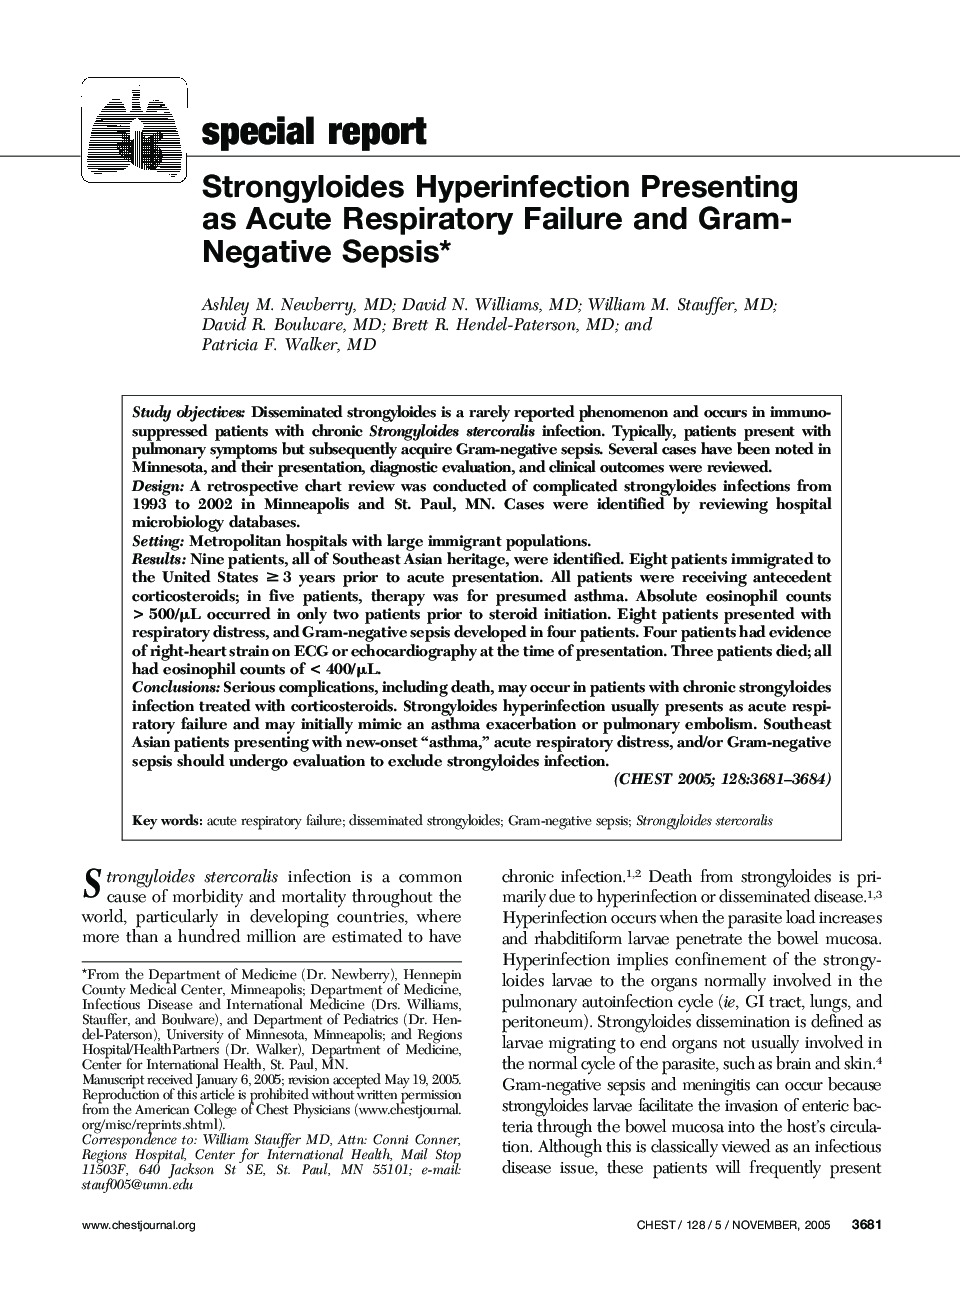 Strongyloides Hyperinfection Presenting as Acute Respiratory Failure and Gram-Negative Sepsis